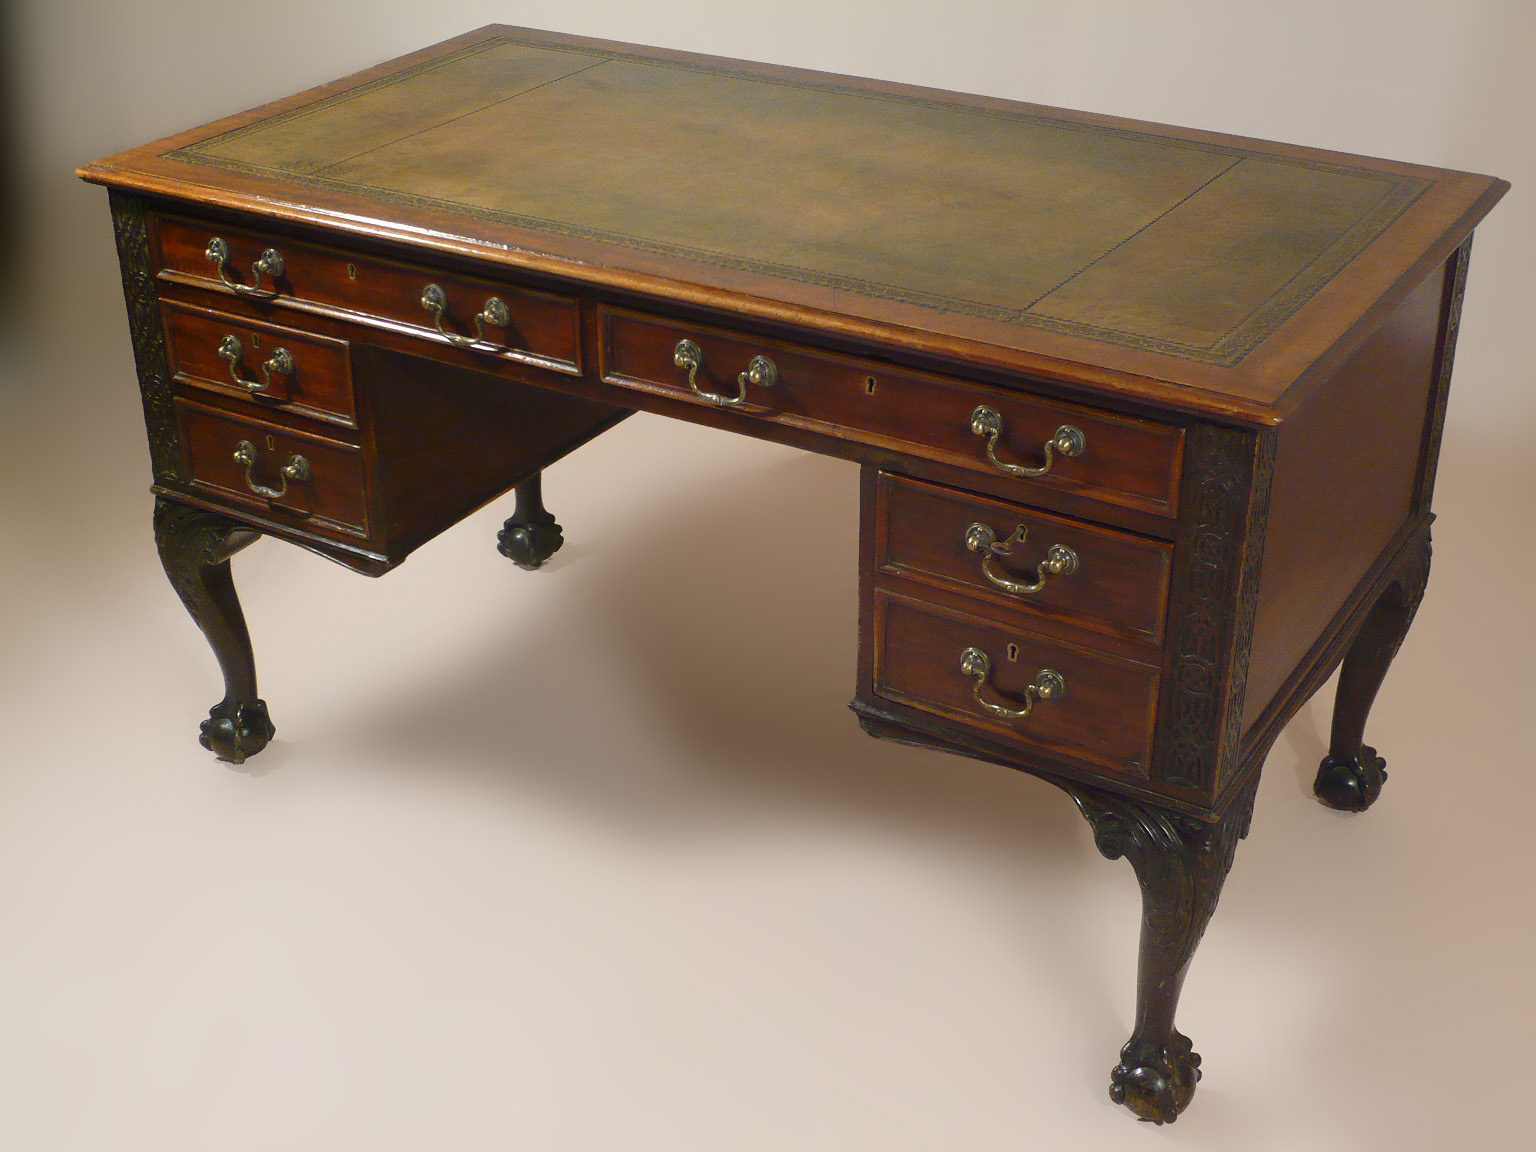 ANTIQUE - GEORGE II STYLE WRITING TABLE